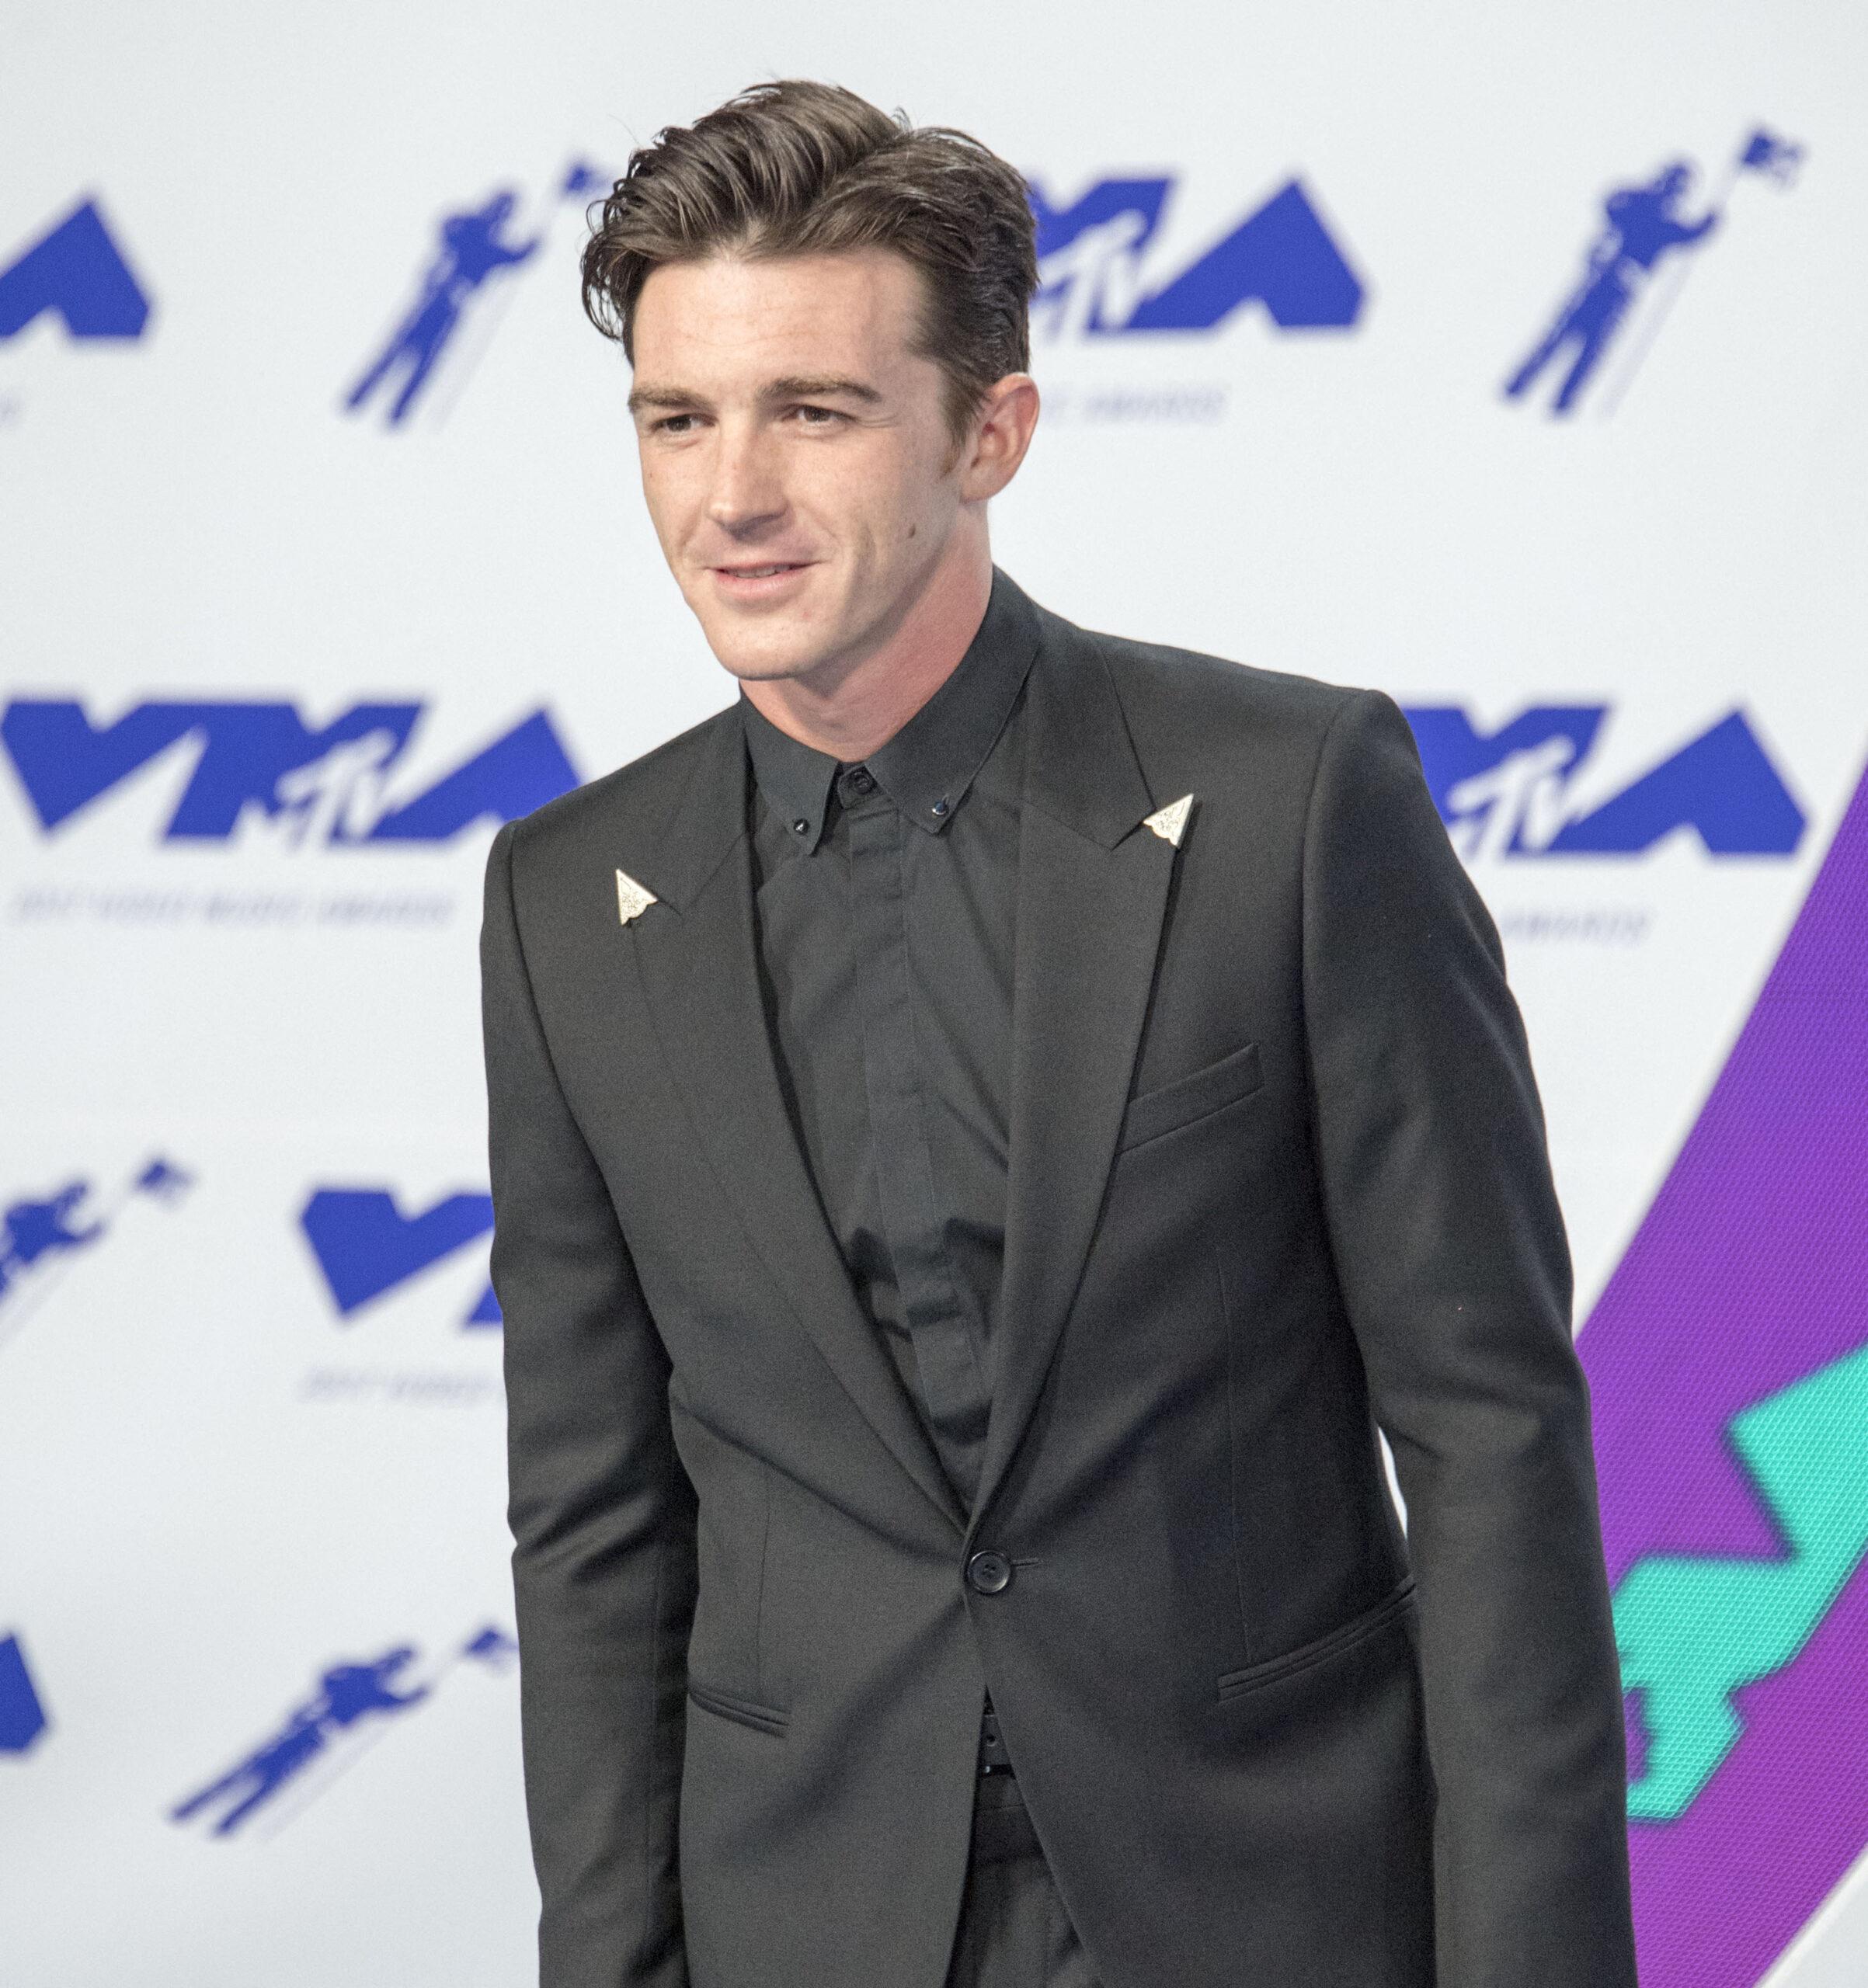 Drake Bell at MTV Video Music Awards, Arrivals, Los Angeles, USA - 27 Aug 2017